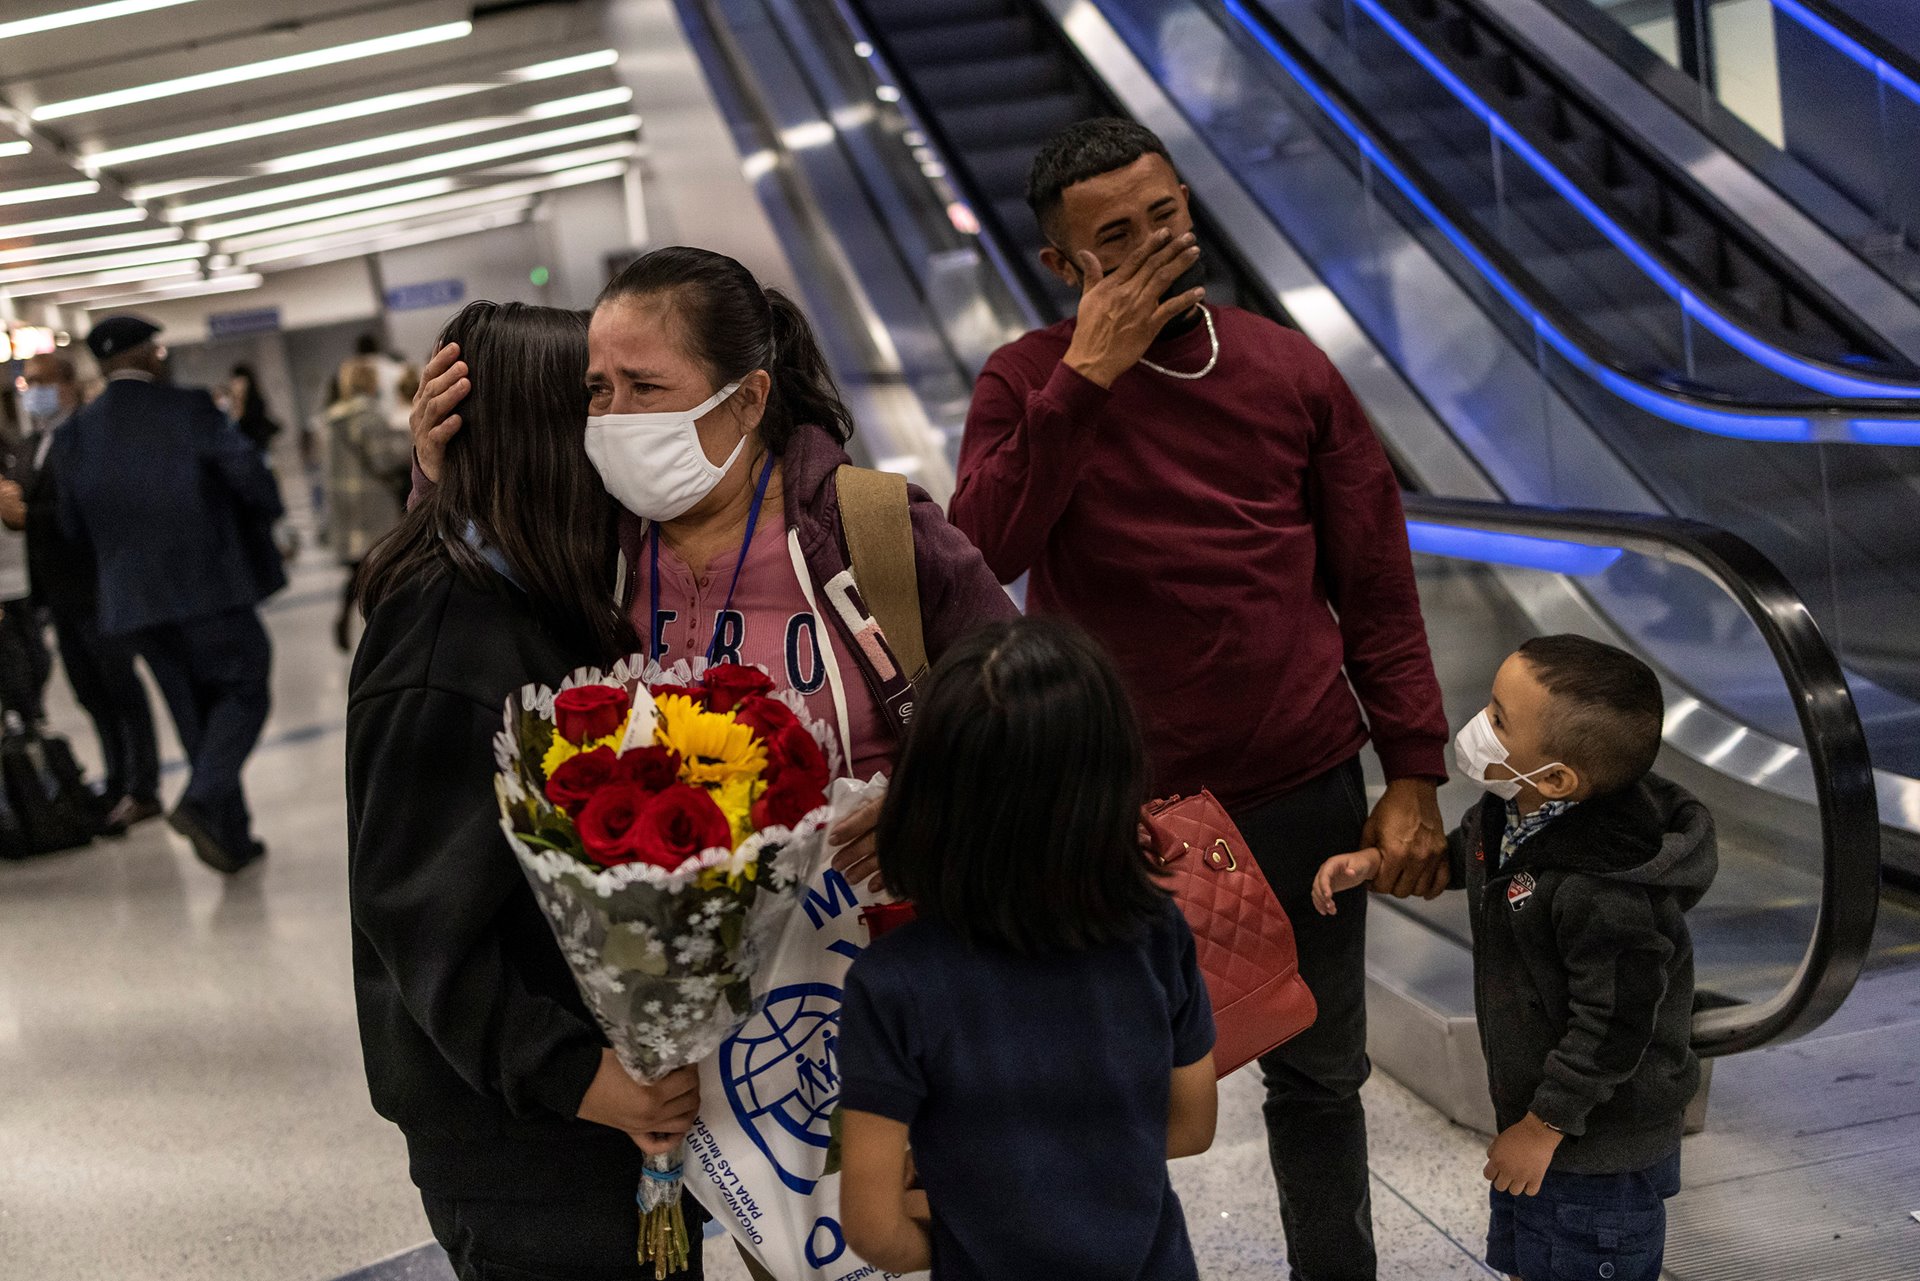 <p>Maria Hernandez hugs her daughter Michelle (referred to by her middle name to protect privacy), while her younger daughter Nicole looks on and son Maynor is overcome with emotion, during their family reunion at Los Angeles International Airport, California, United States.</p>
